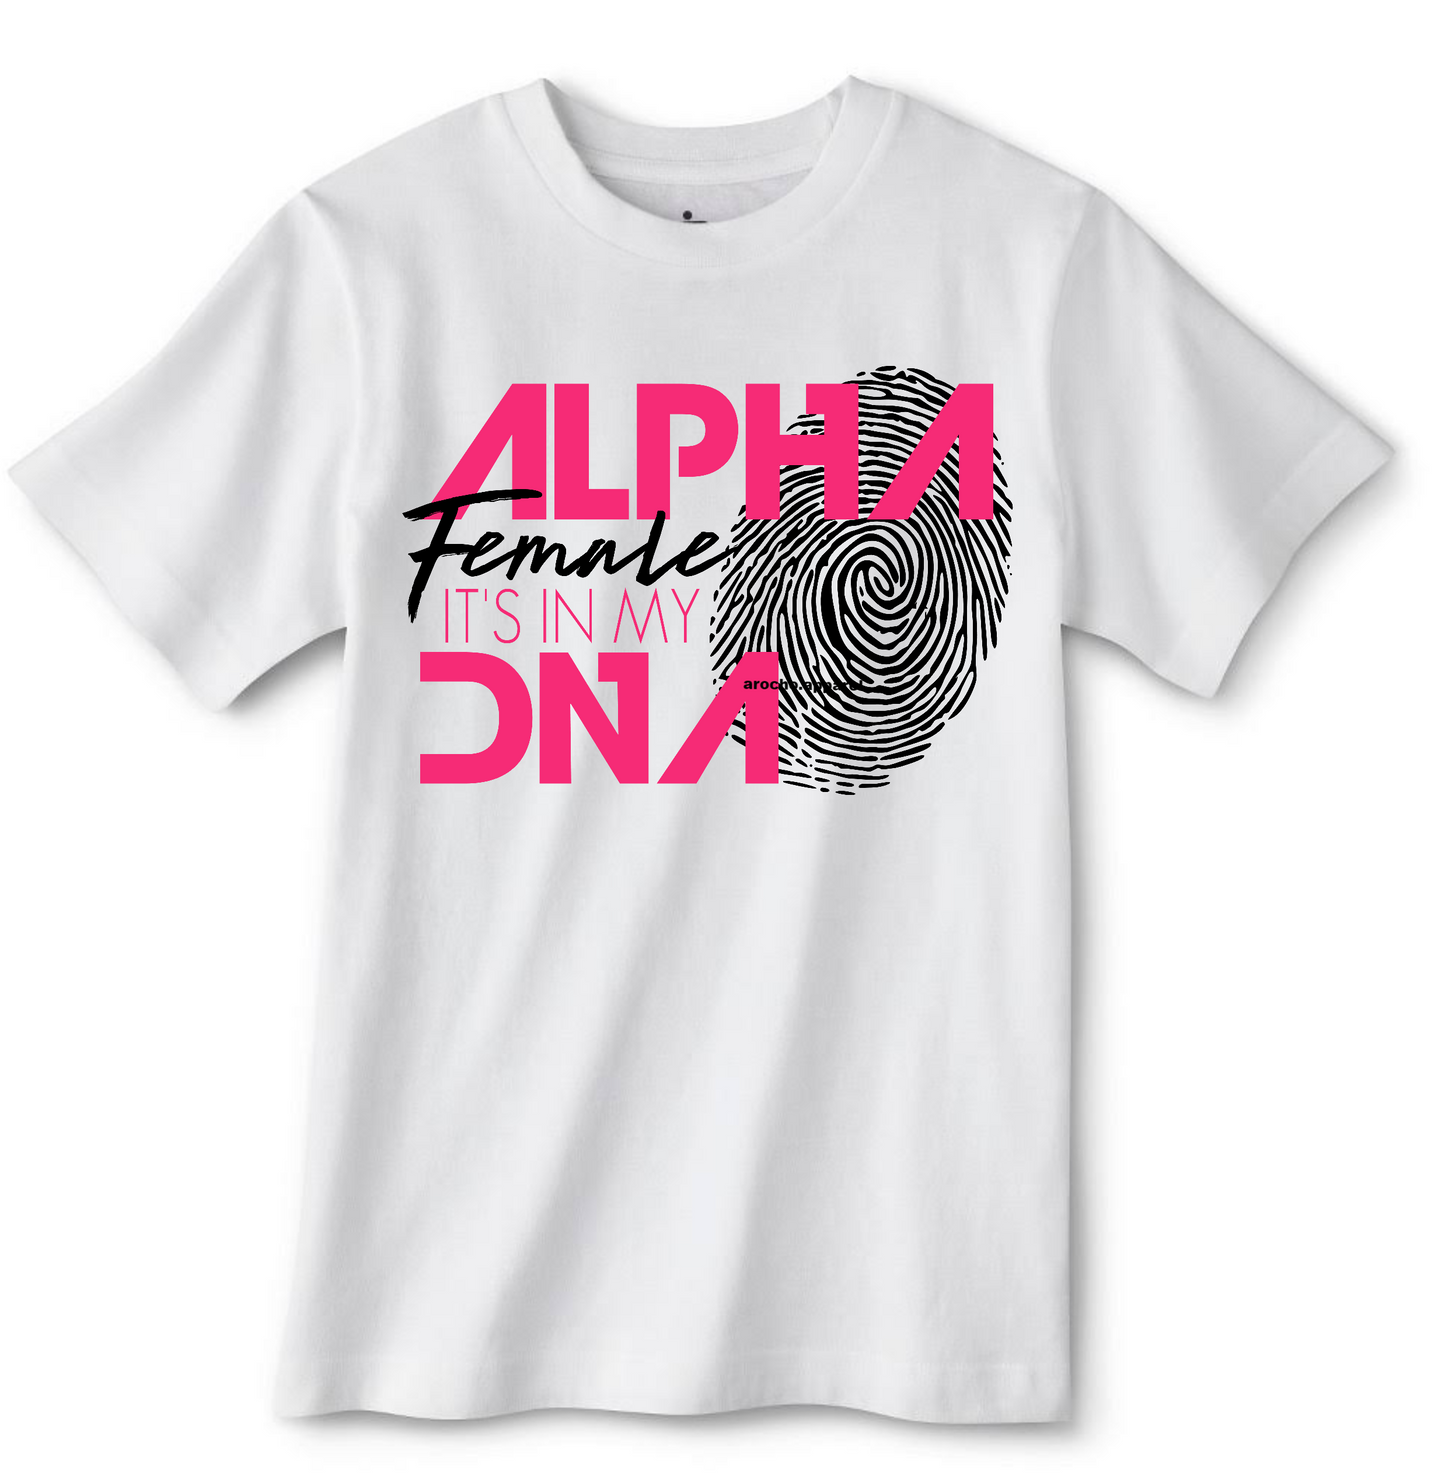 ALPHA FEMALE IT'S IN MY DNA T-SHIRT